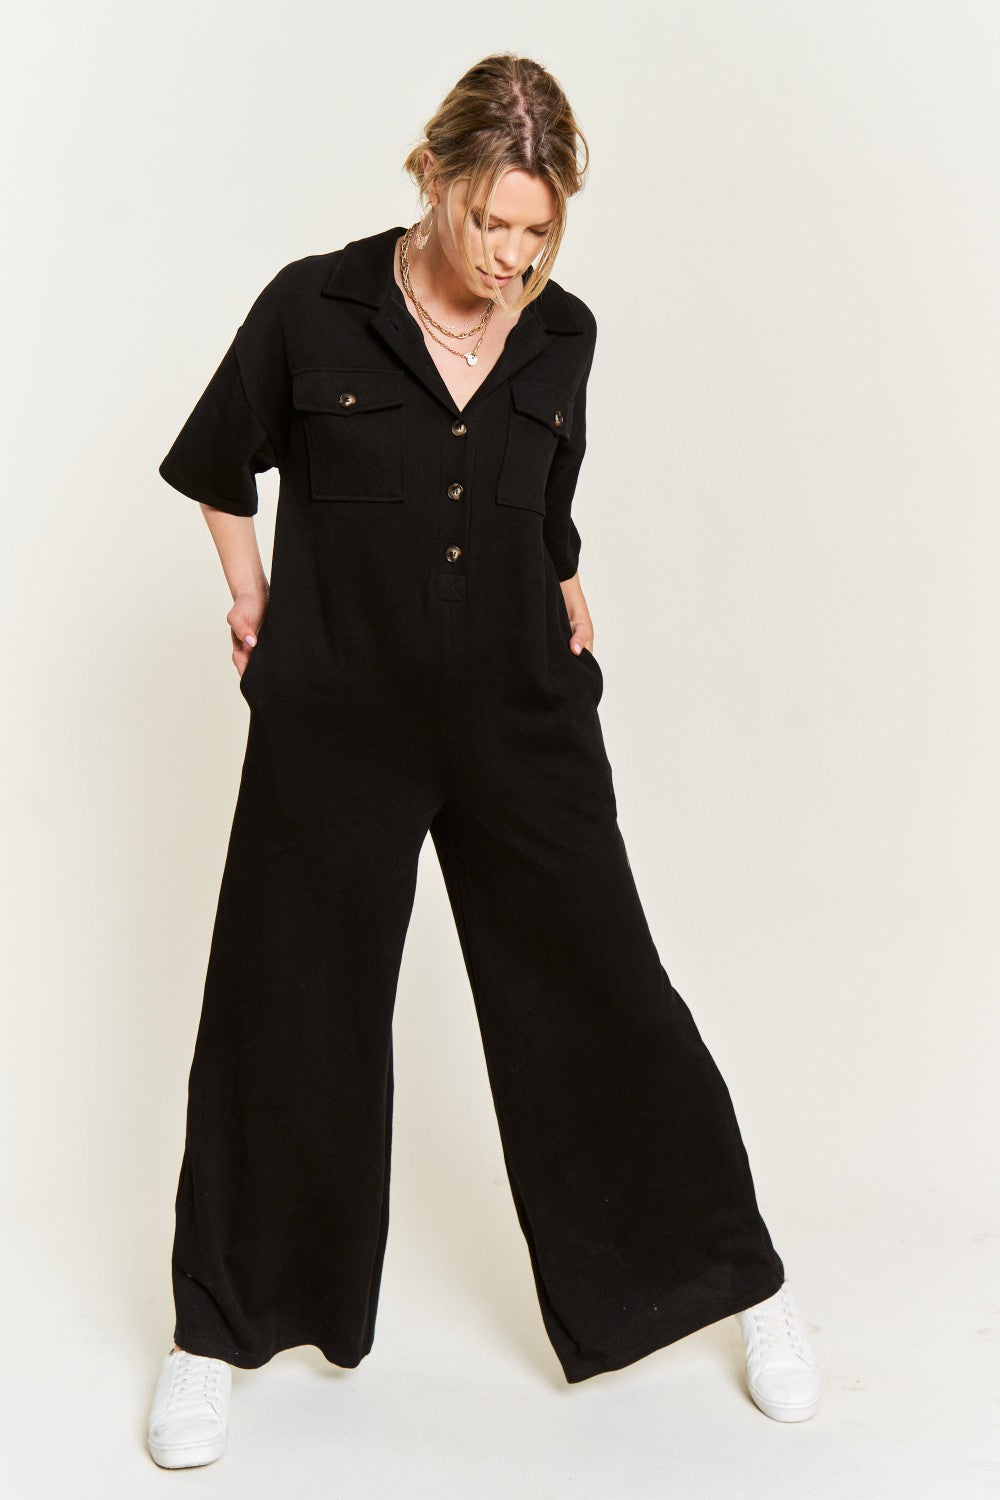 Dropped short sleeves, and wide leg Jumpsuit